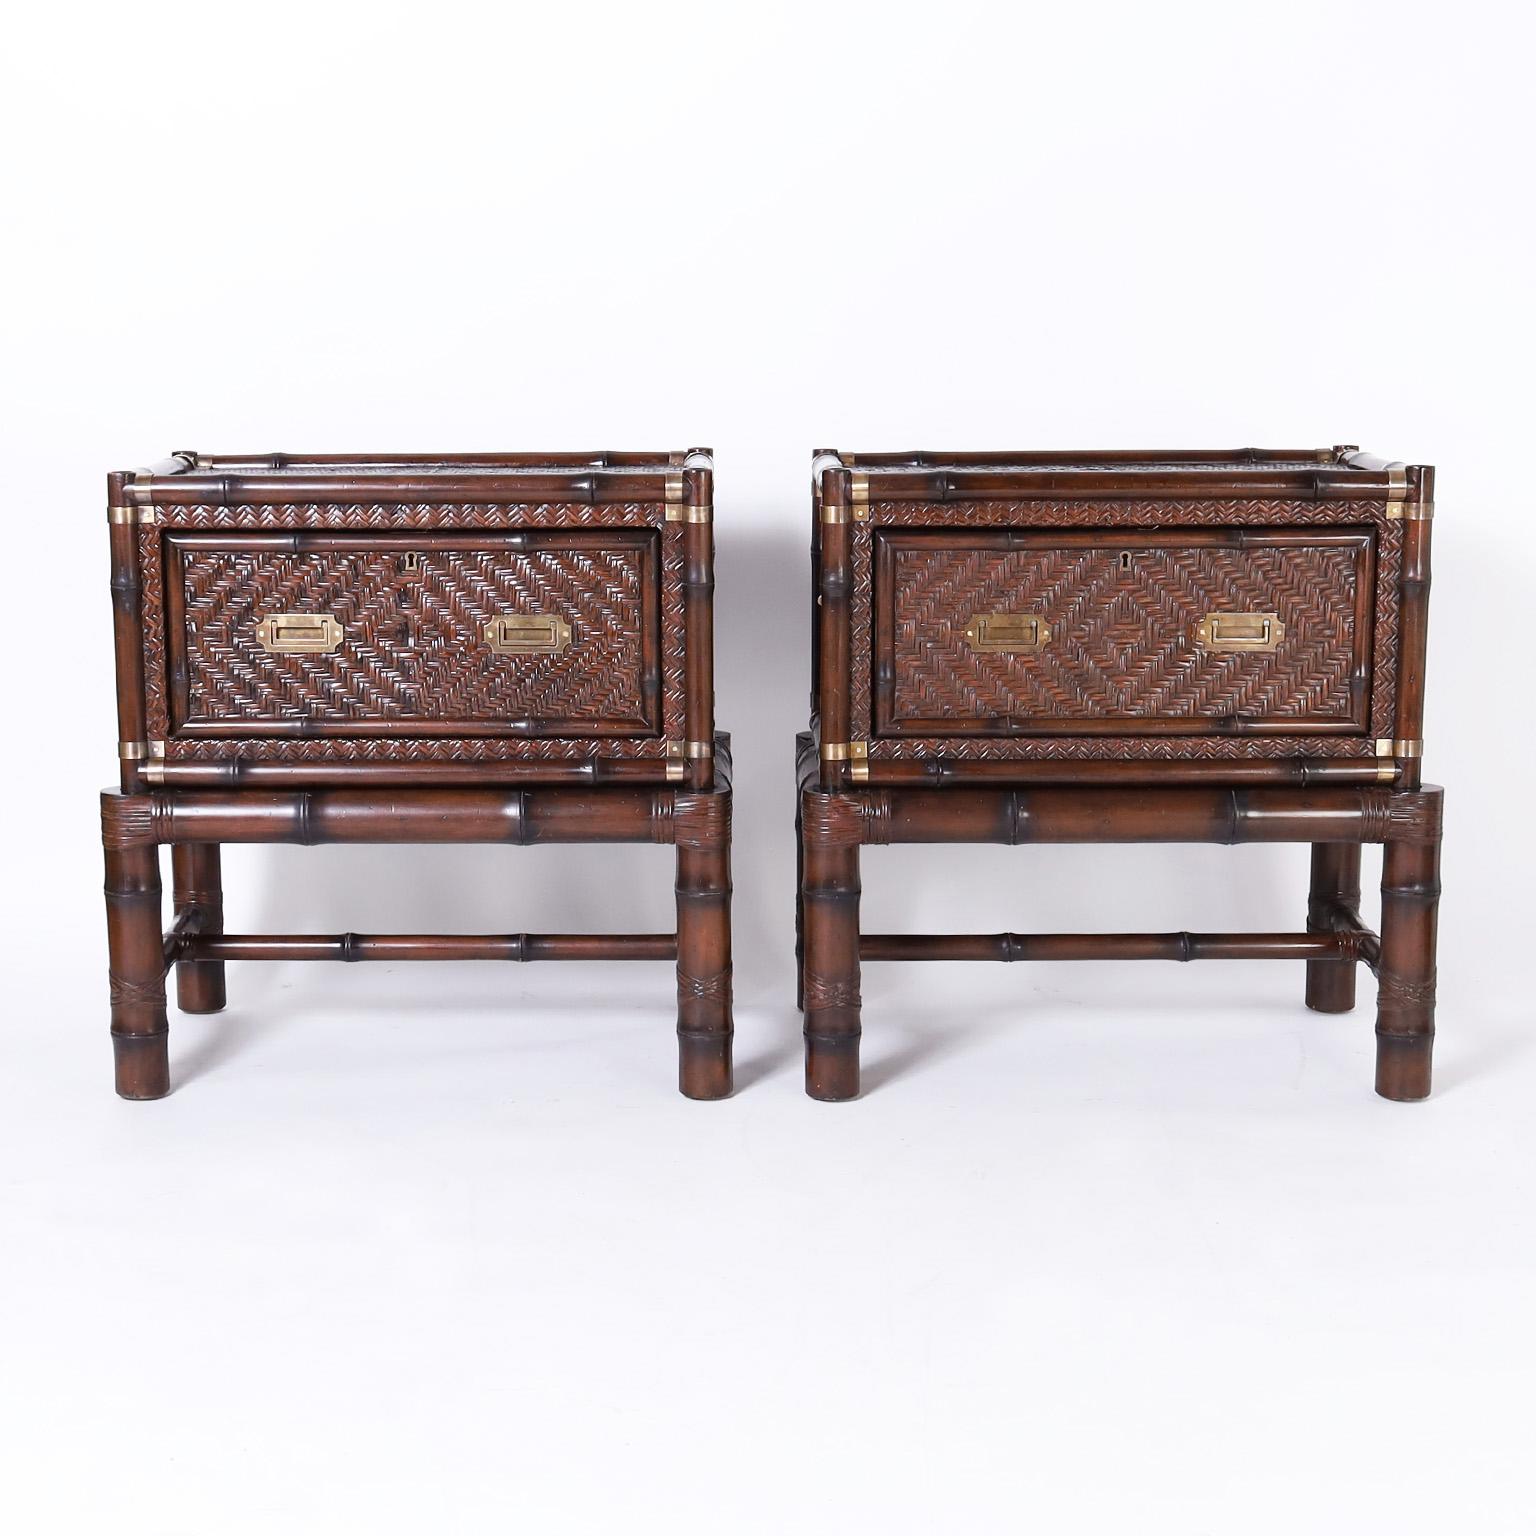 Handsome pair of chests on stands having a one drawer chest with a bamboo frame, campaign brass hardware and woven reed panels in a herringbone design, on a bamboo stand with reed wrapped joints. Signed Ralph Lauren in a drawer.